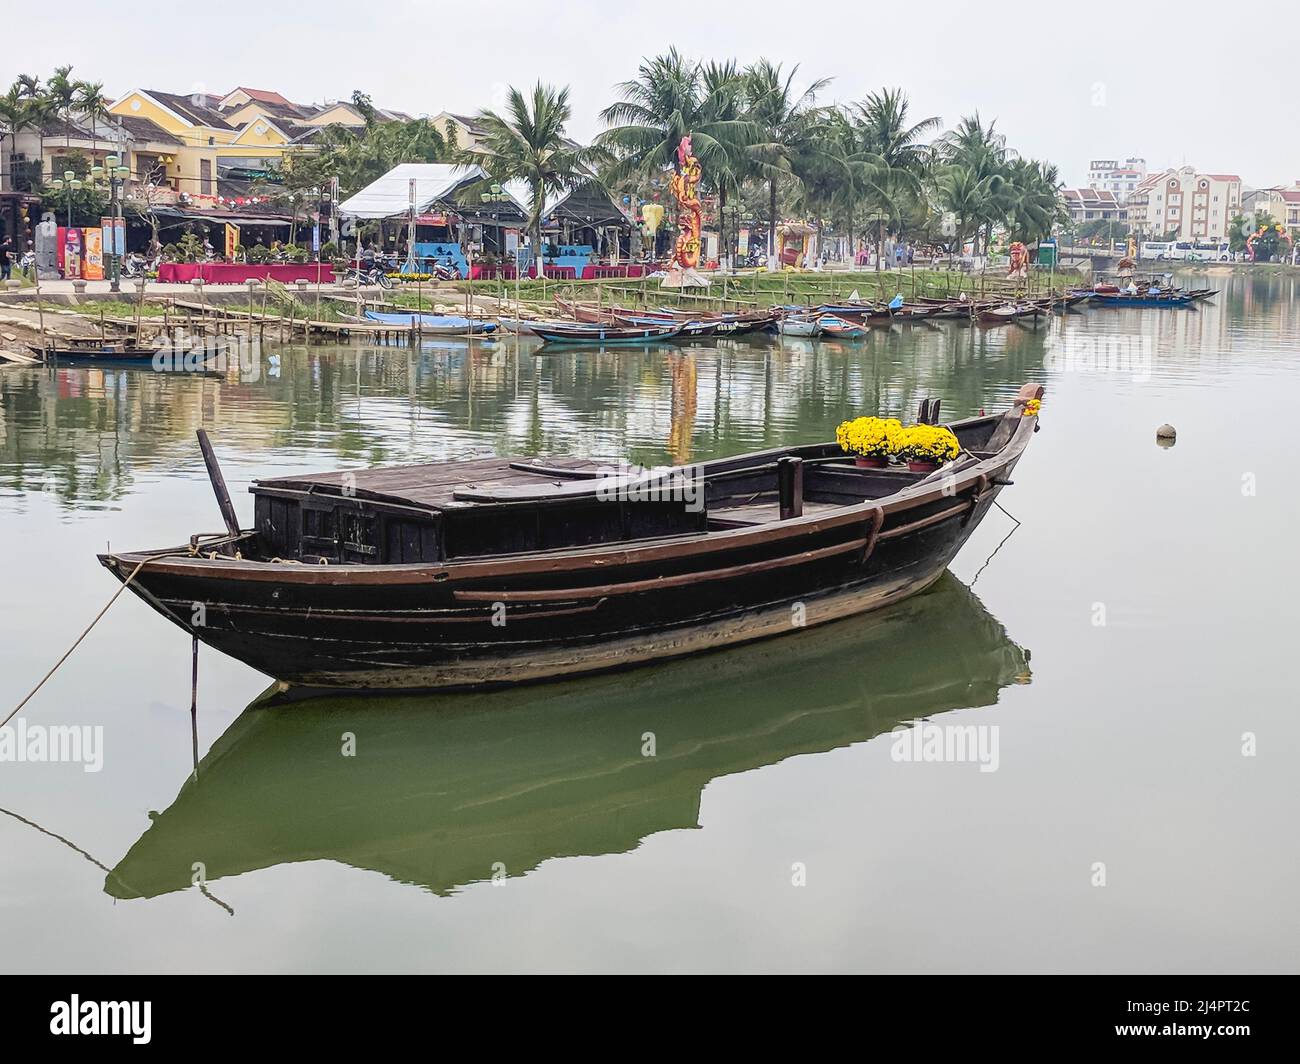 A traditional wooden boat is anchored in the Thu Bon River, Hoi An, Vietnam Stock Photo